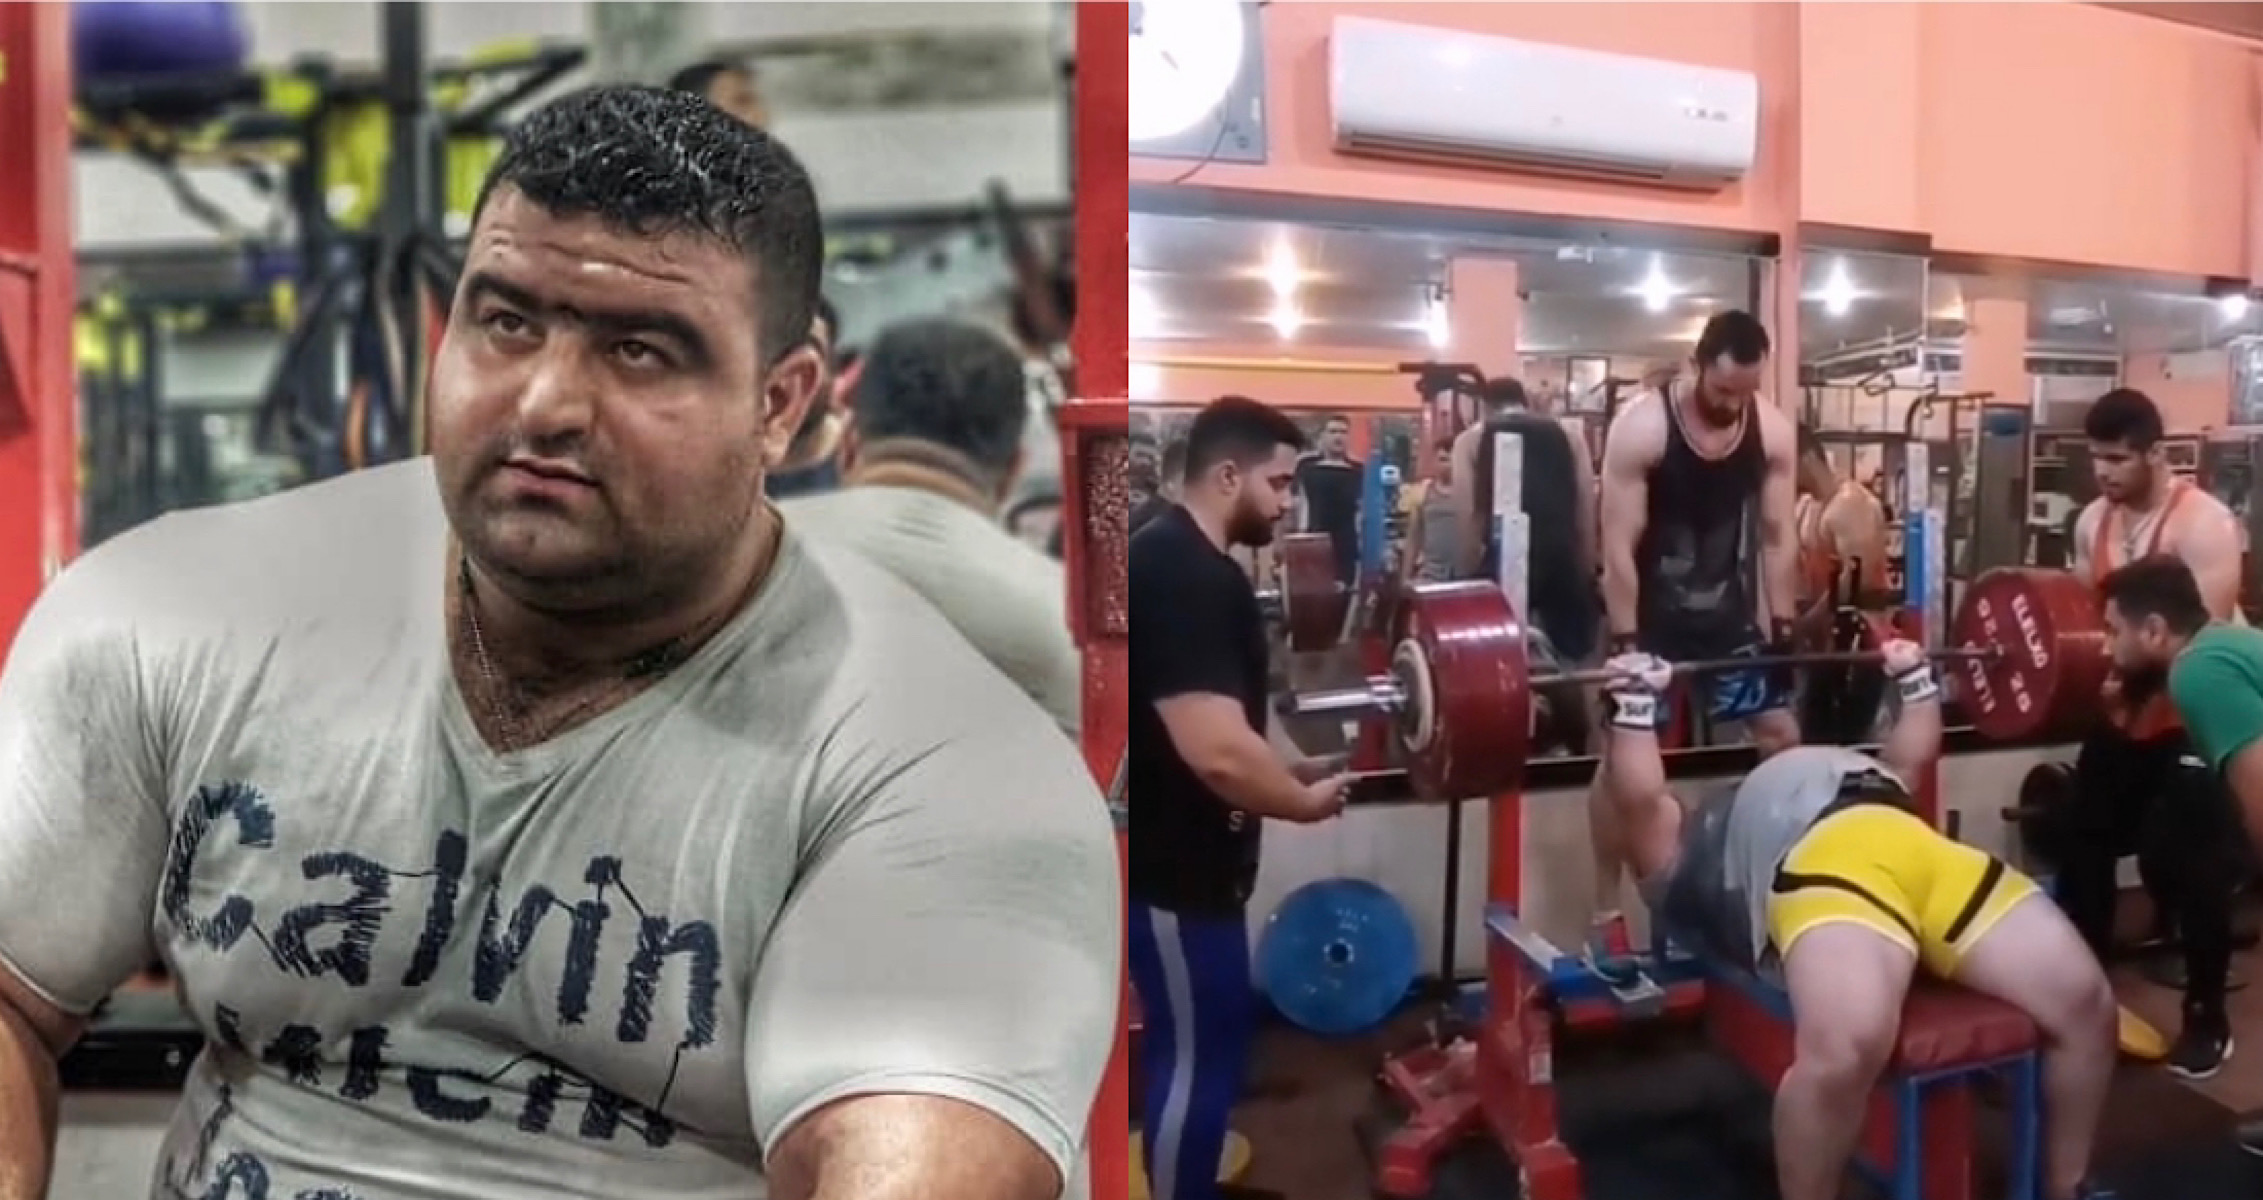 Danial Zamani Benches a Massive 744lbs, Closes in on World Record